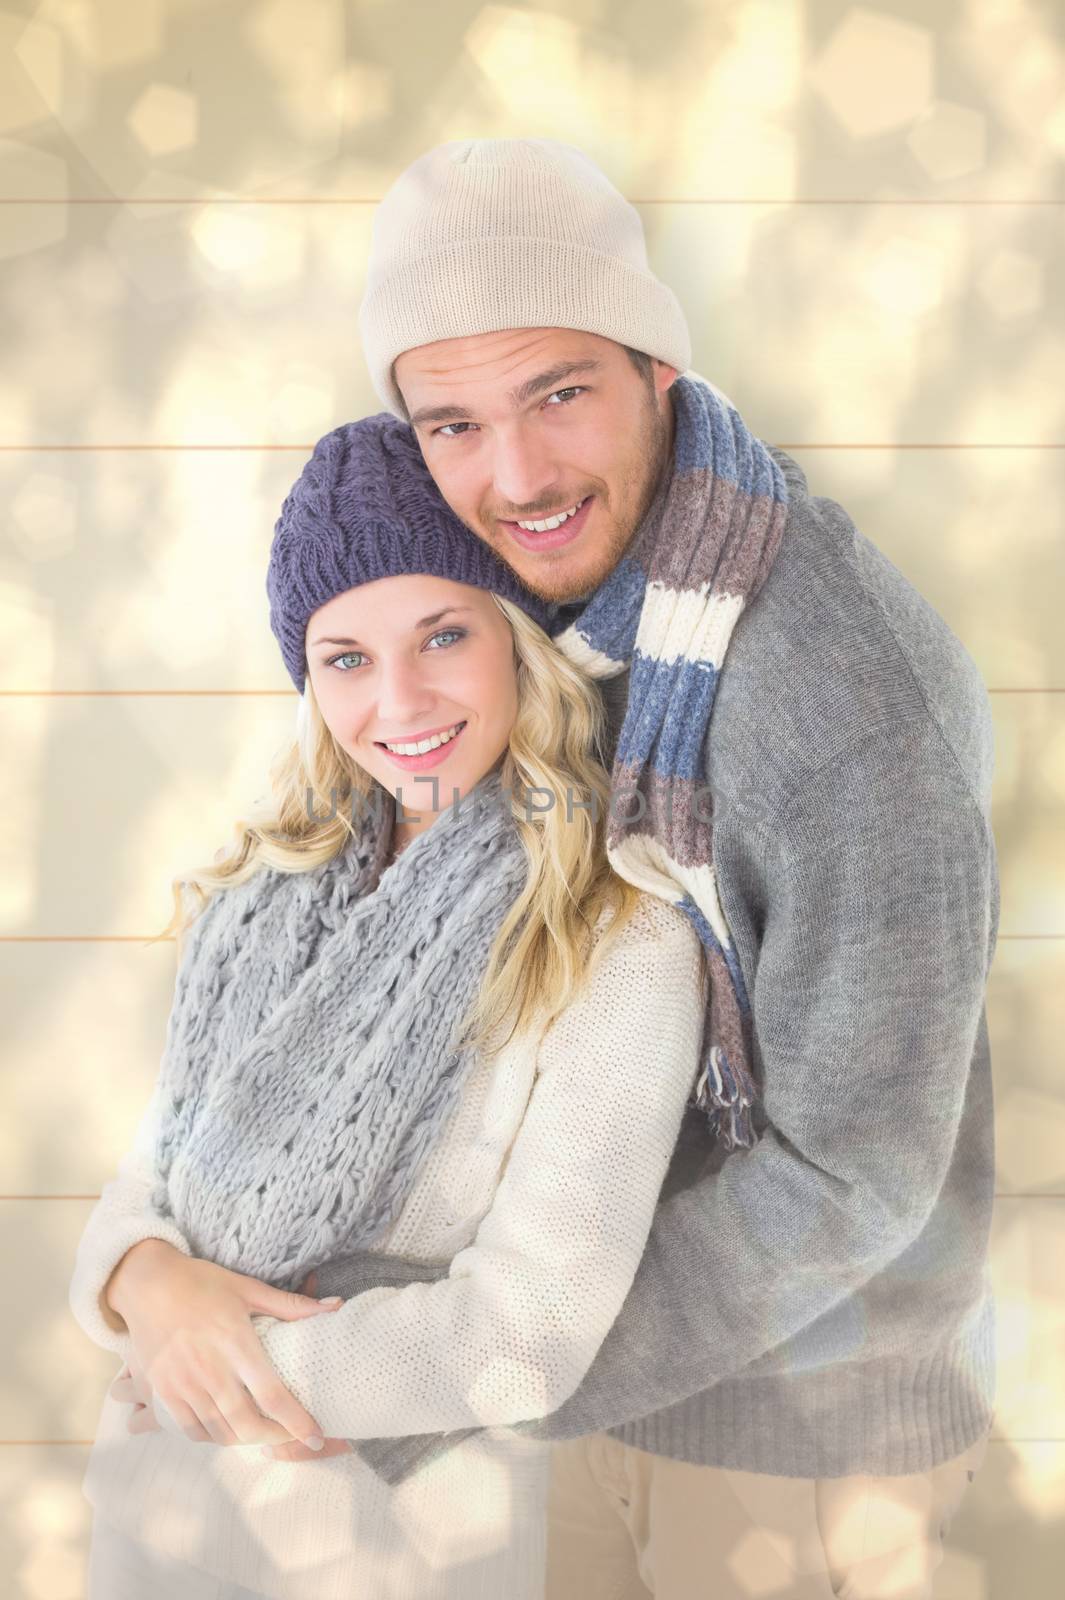 Composite image of attractive couple in winter fashion hugging by Wavebreakmedia